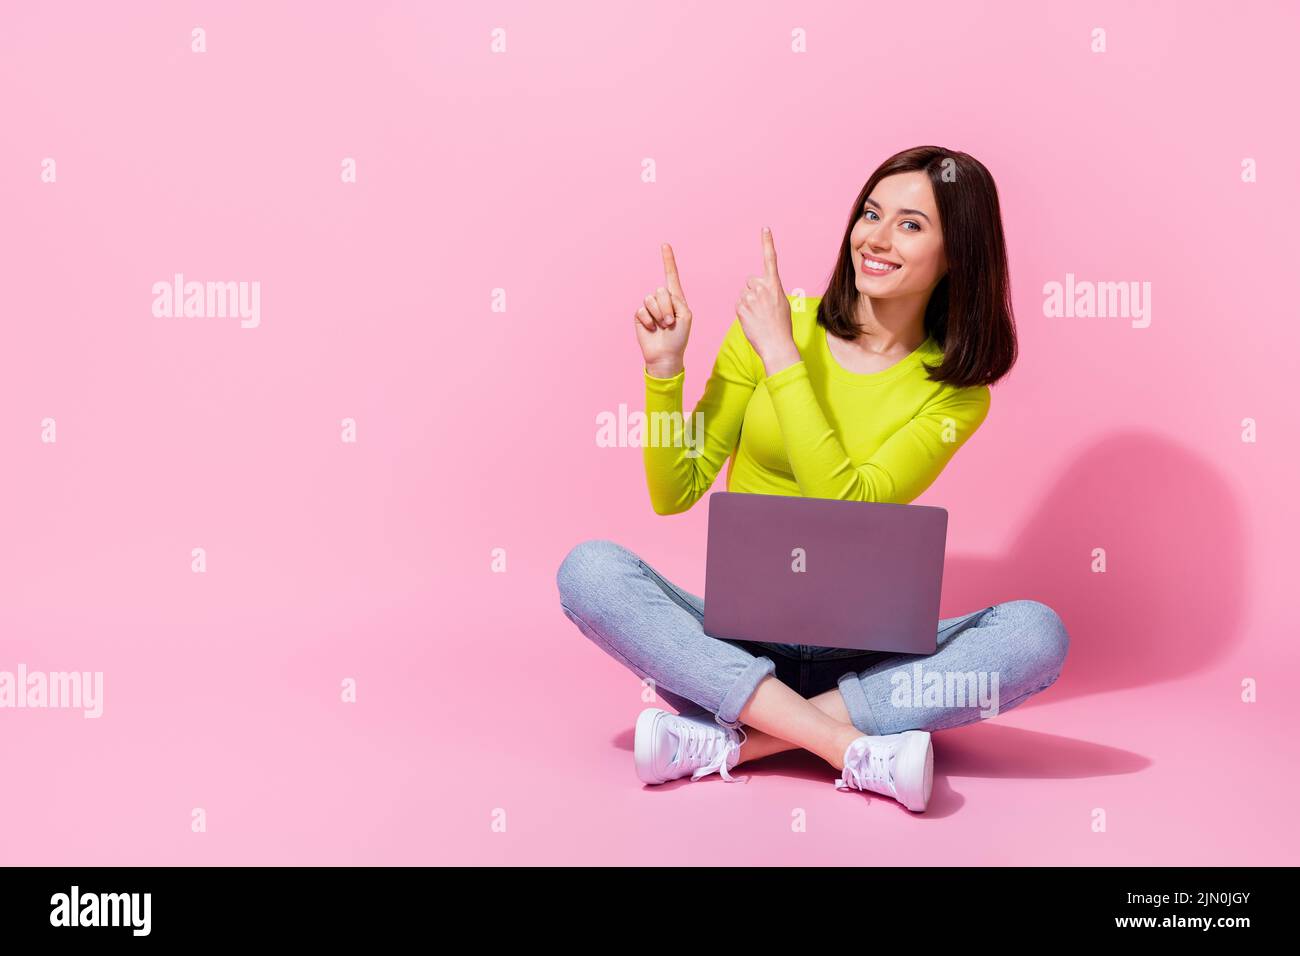 Photo of cute lady specialis tarm demonstrate offer distance work study use gadget device sit empty space isolated on pink color background Stock Photo